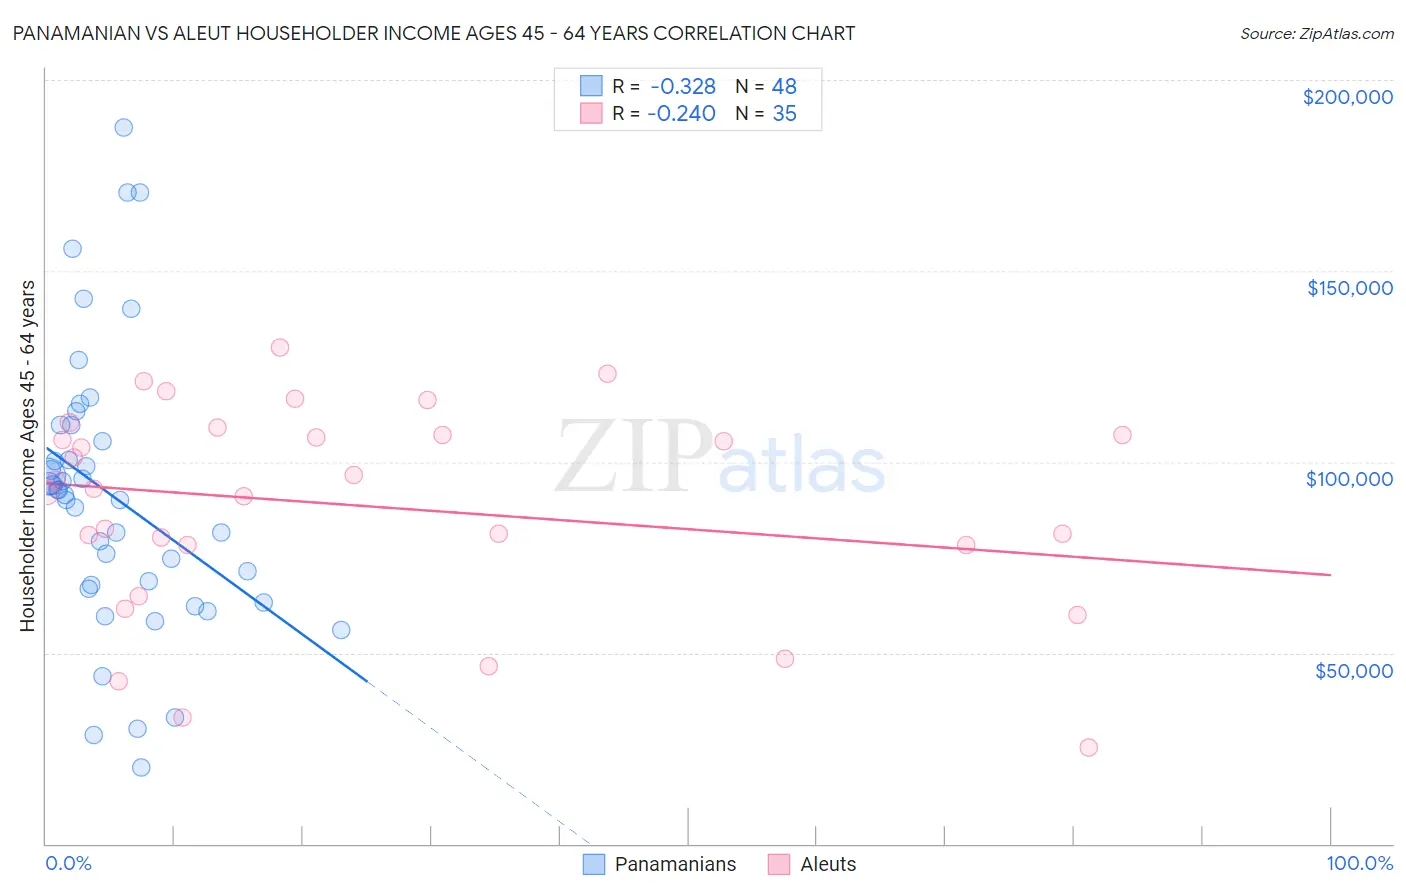 Panamanian vs Aleut Householder Income Ages 45 - 64 years